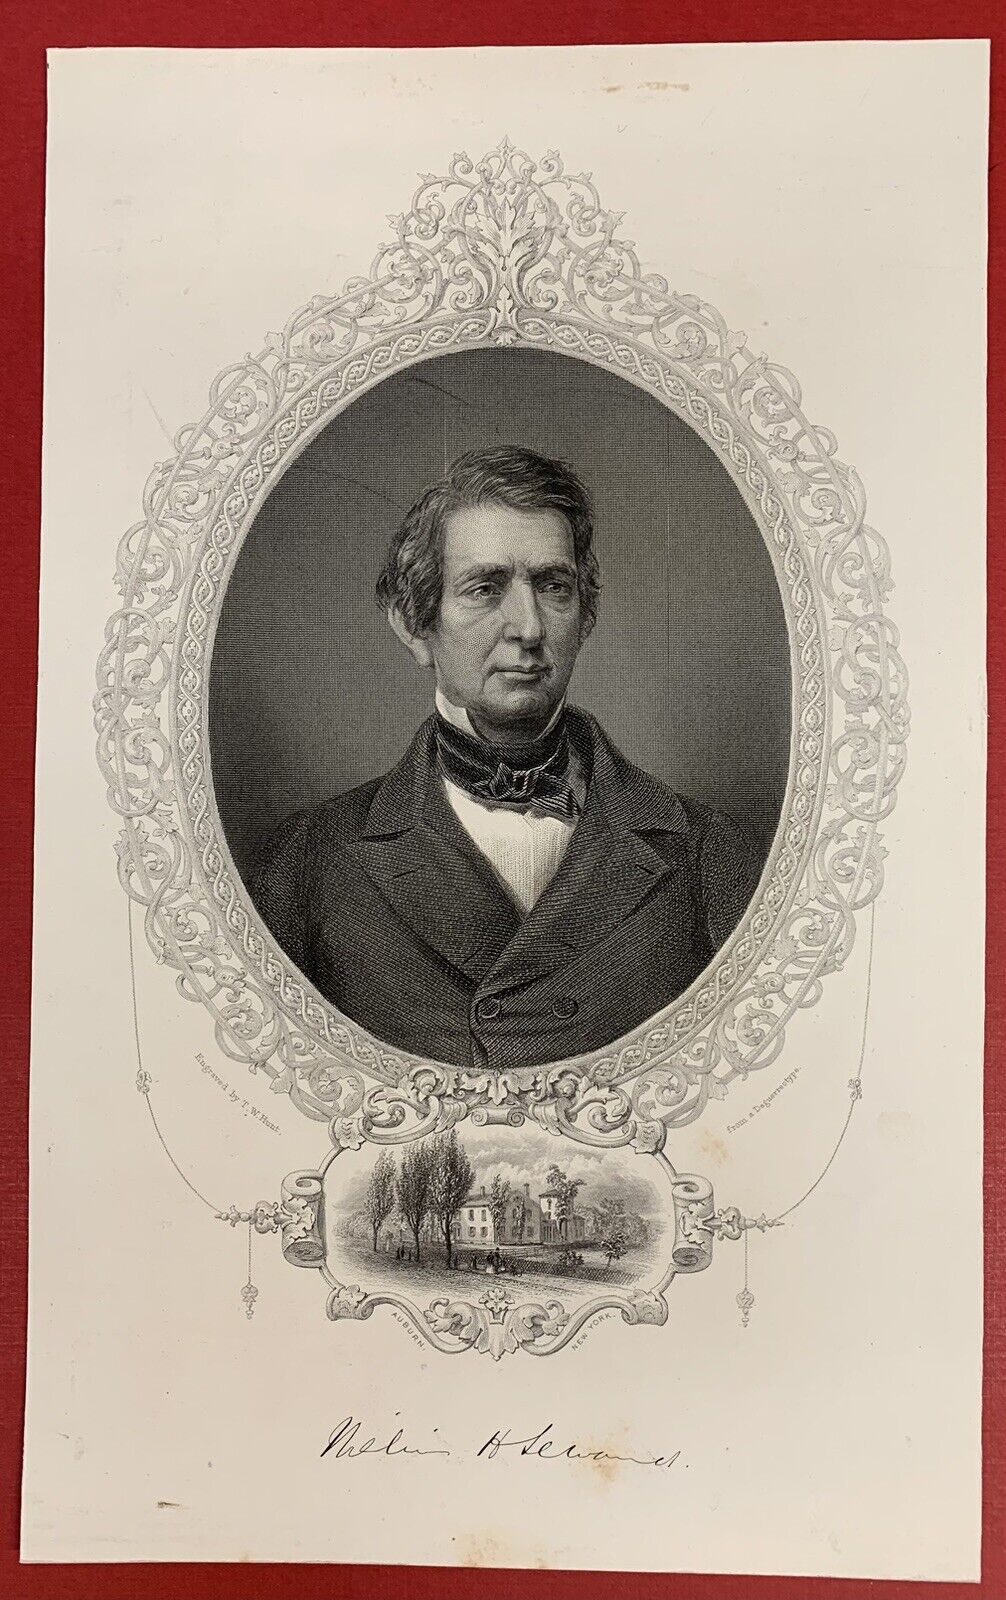 William H. Seward and his Home, Engraving by T.W. Hunt, from a Daguerreotype